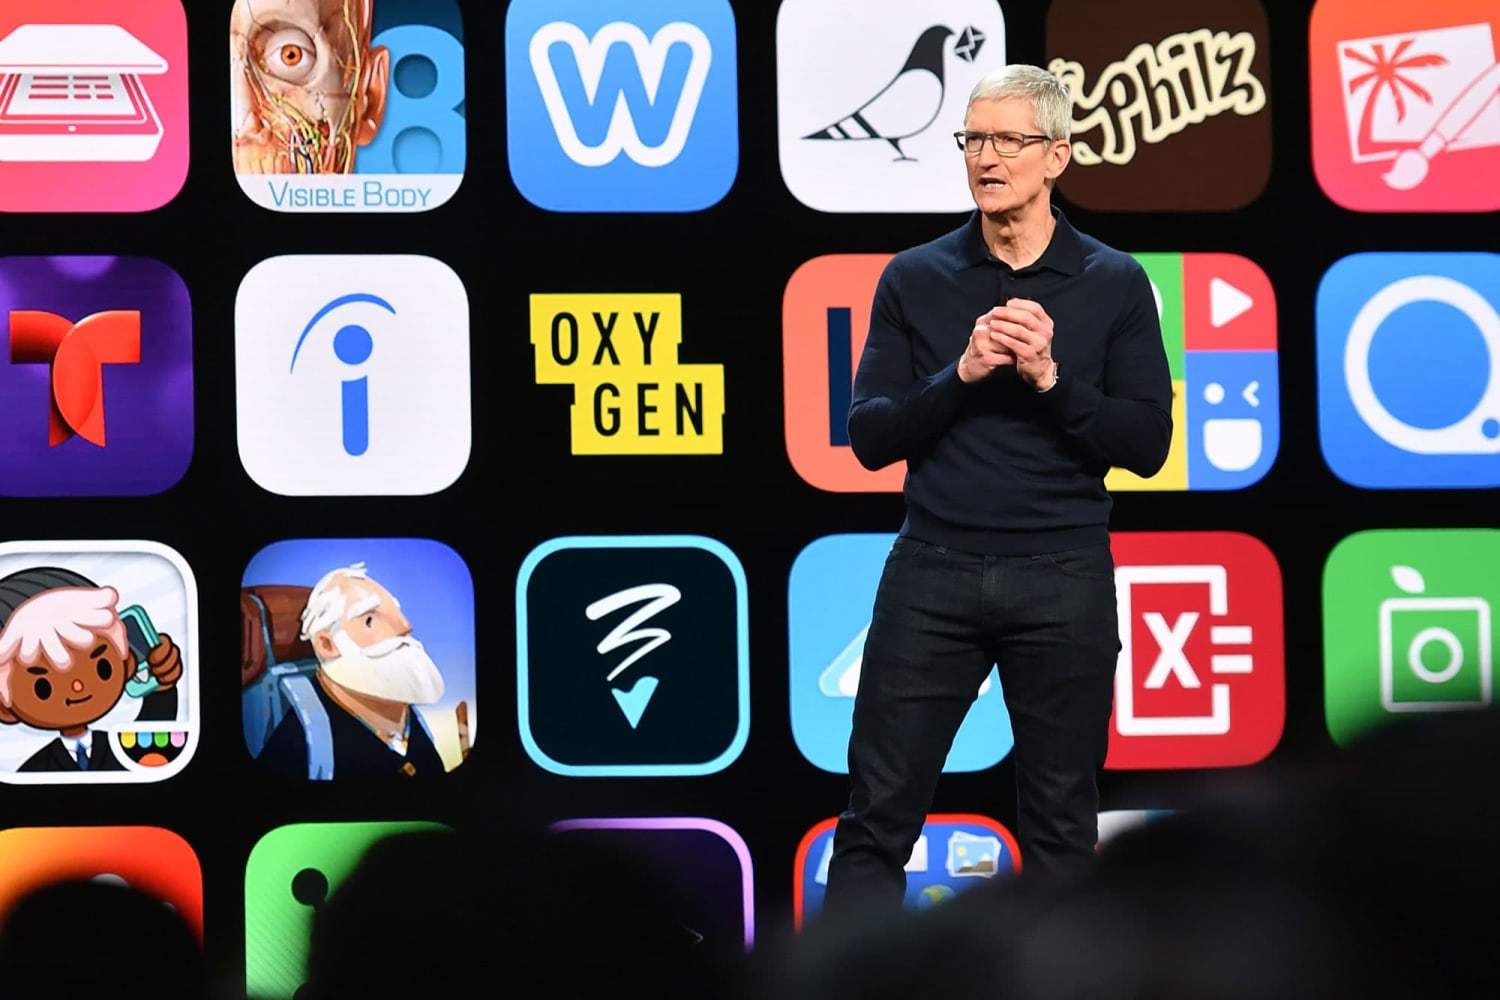 Apple's App Store had gross sales around $64 billion last year and it's growing strongly again